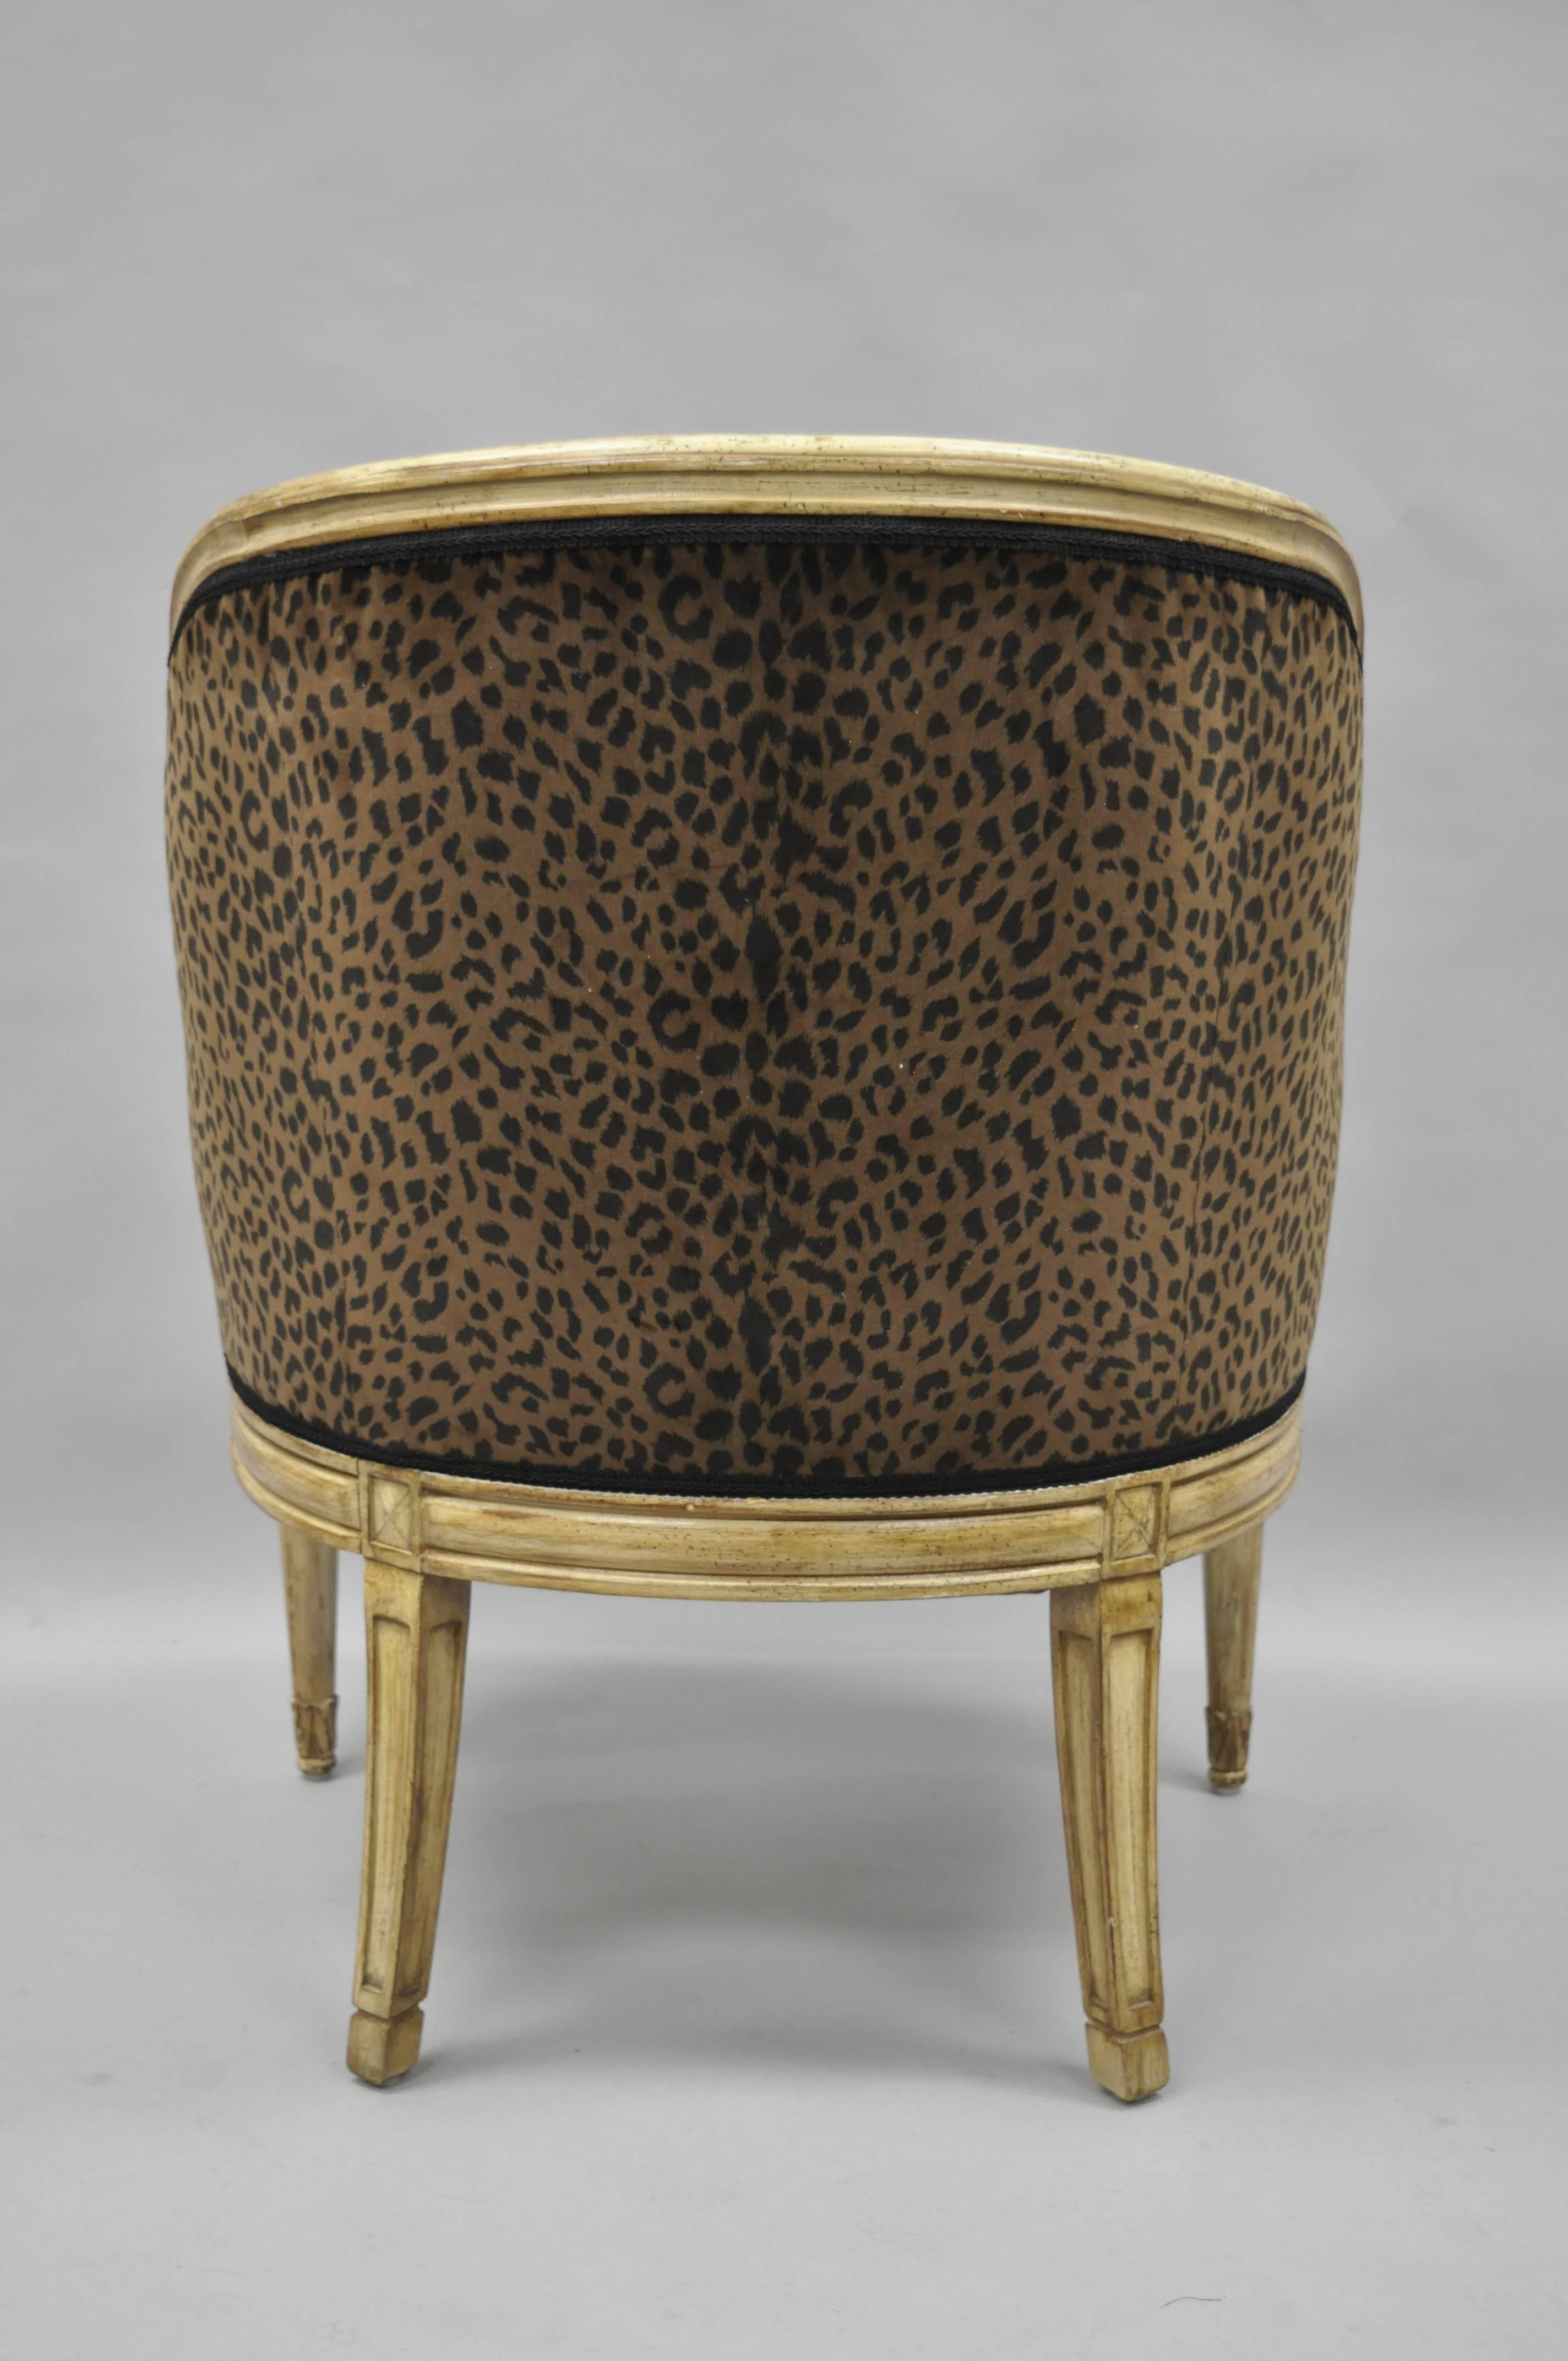 20th Century Barrel Back Rams Goat Head Empire Neoclassical Style Cheetah Fabric Lounge Chair